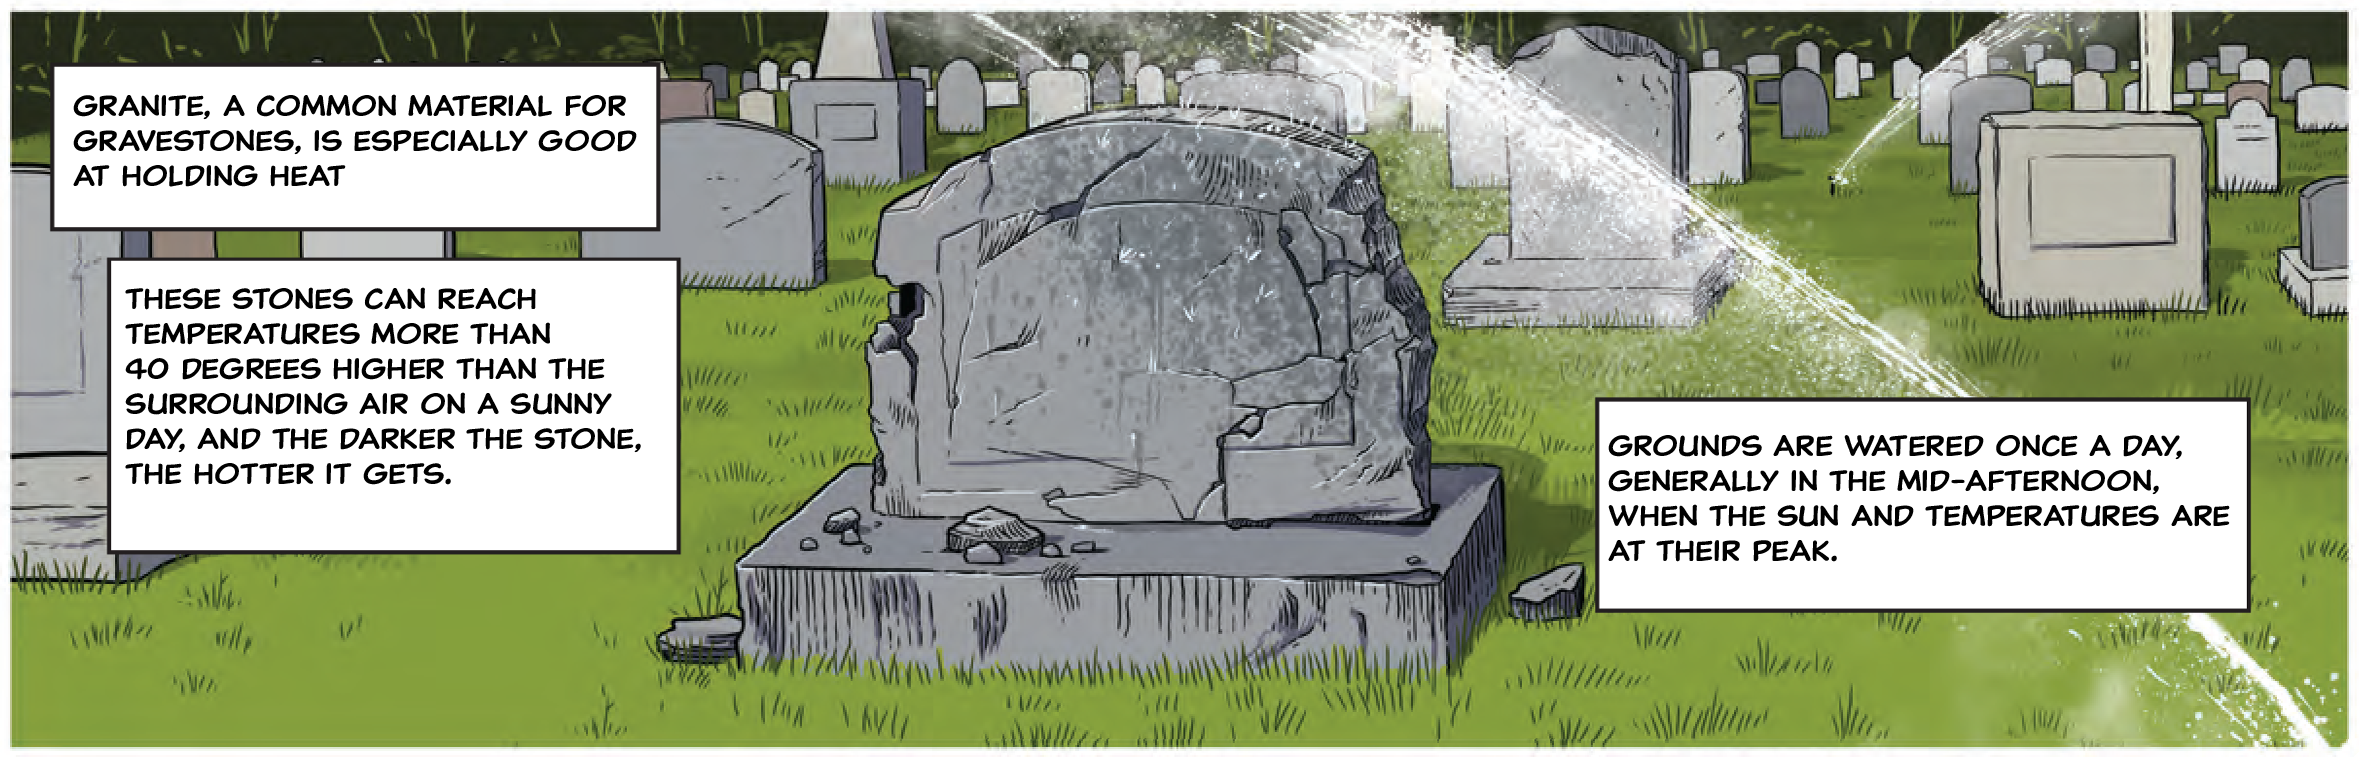 A cracked granite gravestone amid debris sits on a well-manicured cemetery lawn while showered with a water sprinkler.